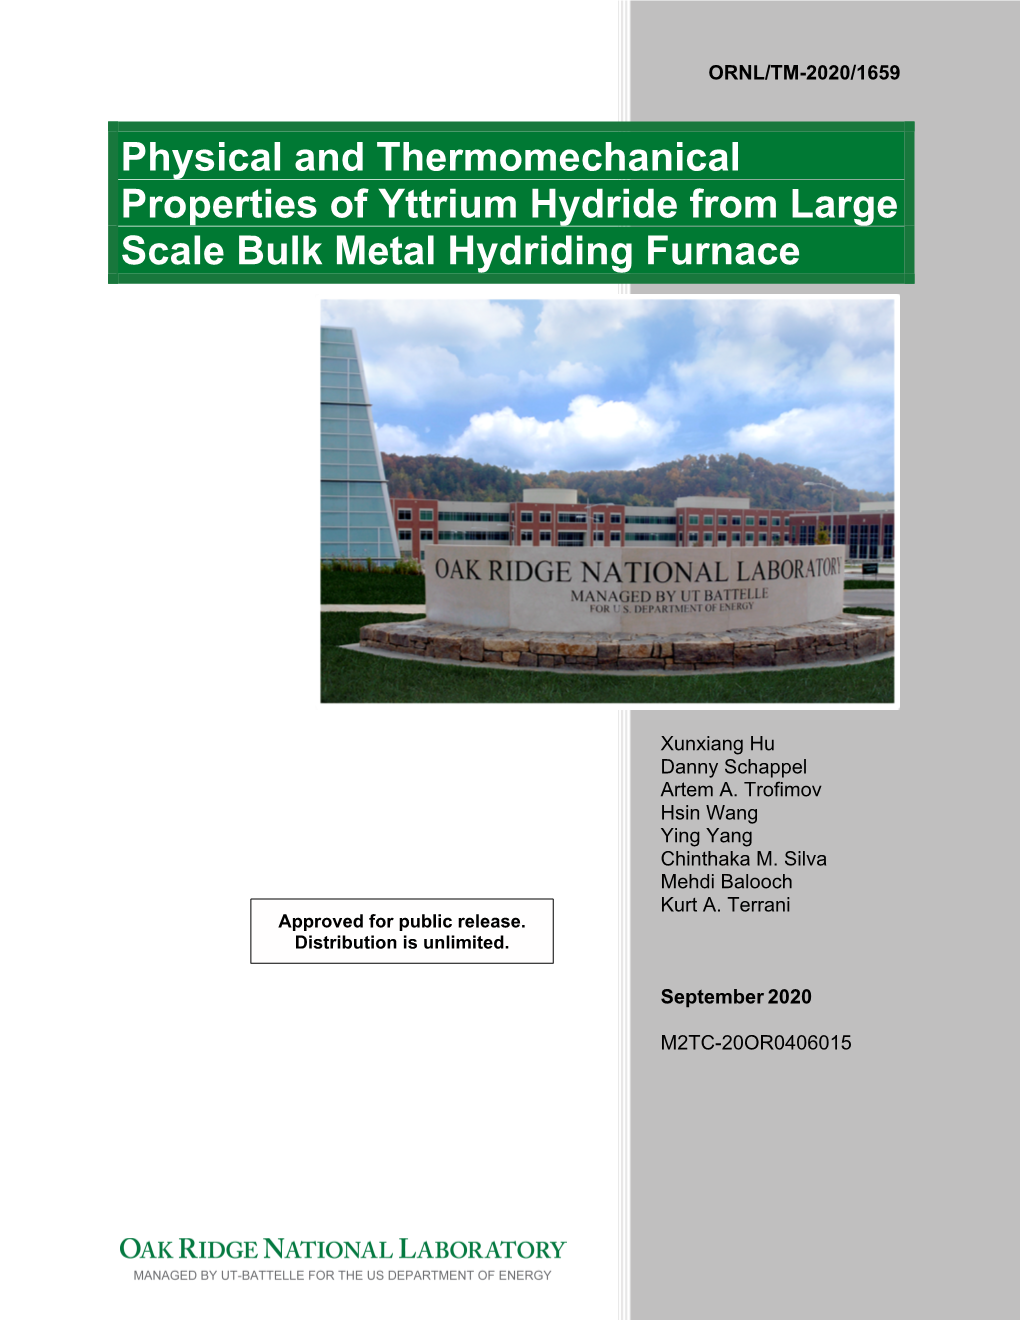 Physical and Thermomechanical Properties of Yttrium Hydride from Large Scale Bulk Metal Hydriding Furnace